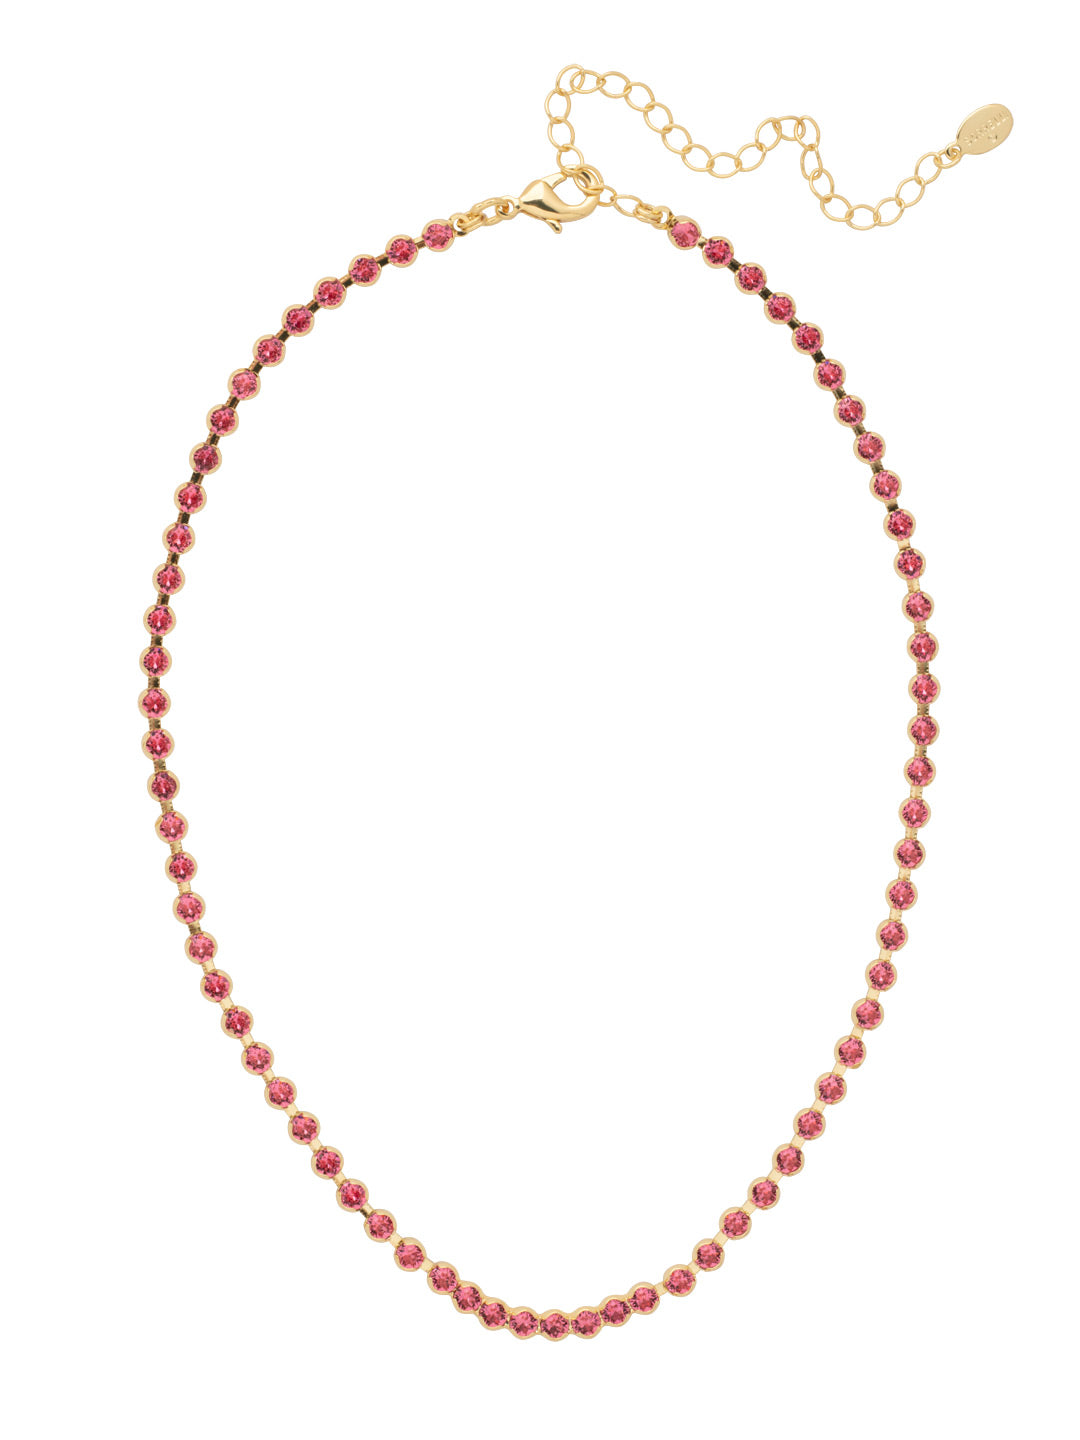 Marnie Tennis Necklace - NFA2BGRO - <p>Perfect for dressing up or down, the classic Marnie Tennis Necklace features a repeating line of crystals secured by a lobster claw clasp. From Sorrelli's Rose collection in our Bright Gold-tone finish.</p>